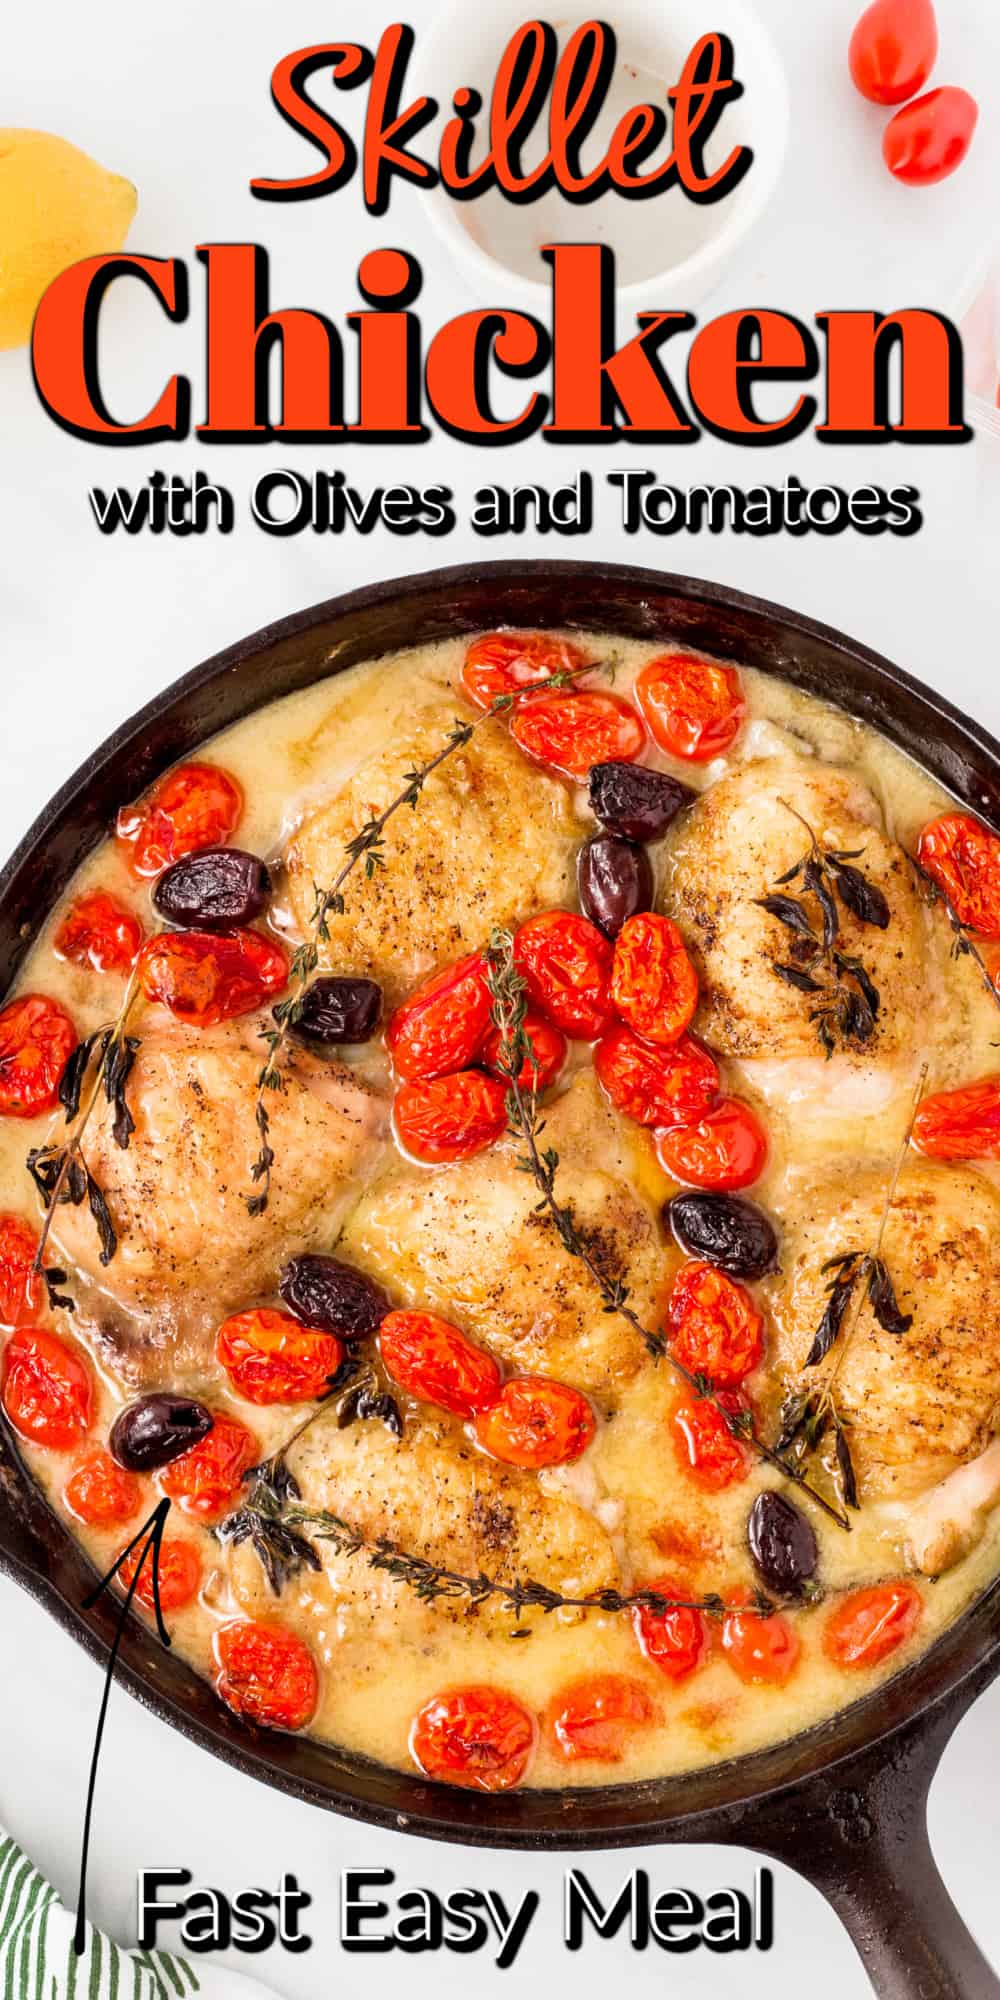 Skillet Chicken with Olives and Tomatoes Pin